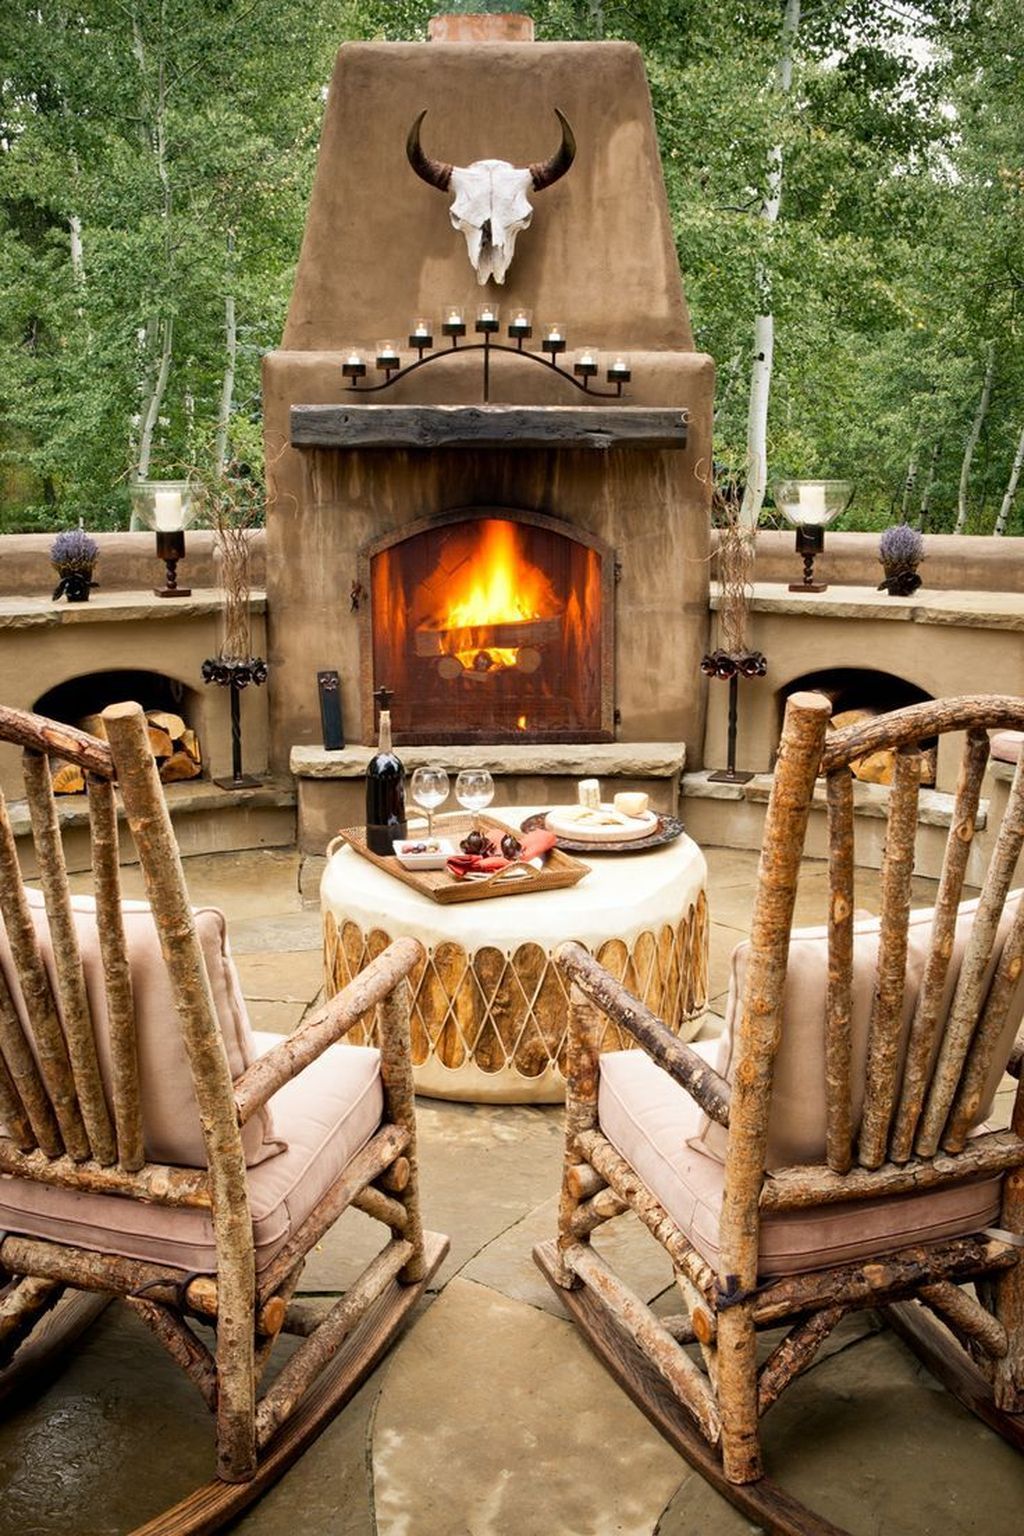 Western Fireplace Inspirational 43 Interesting Rustic Outdoor Fireplace Designs Barbecue